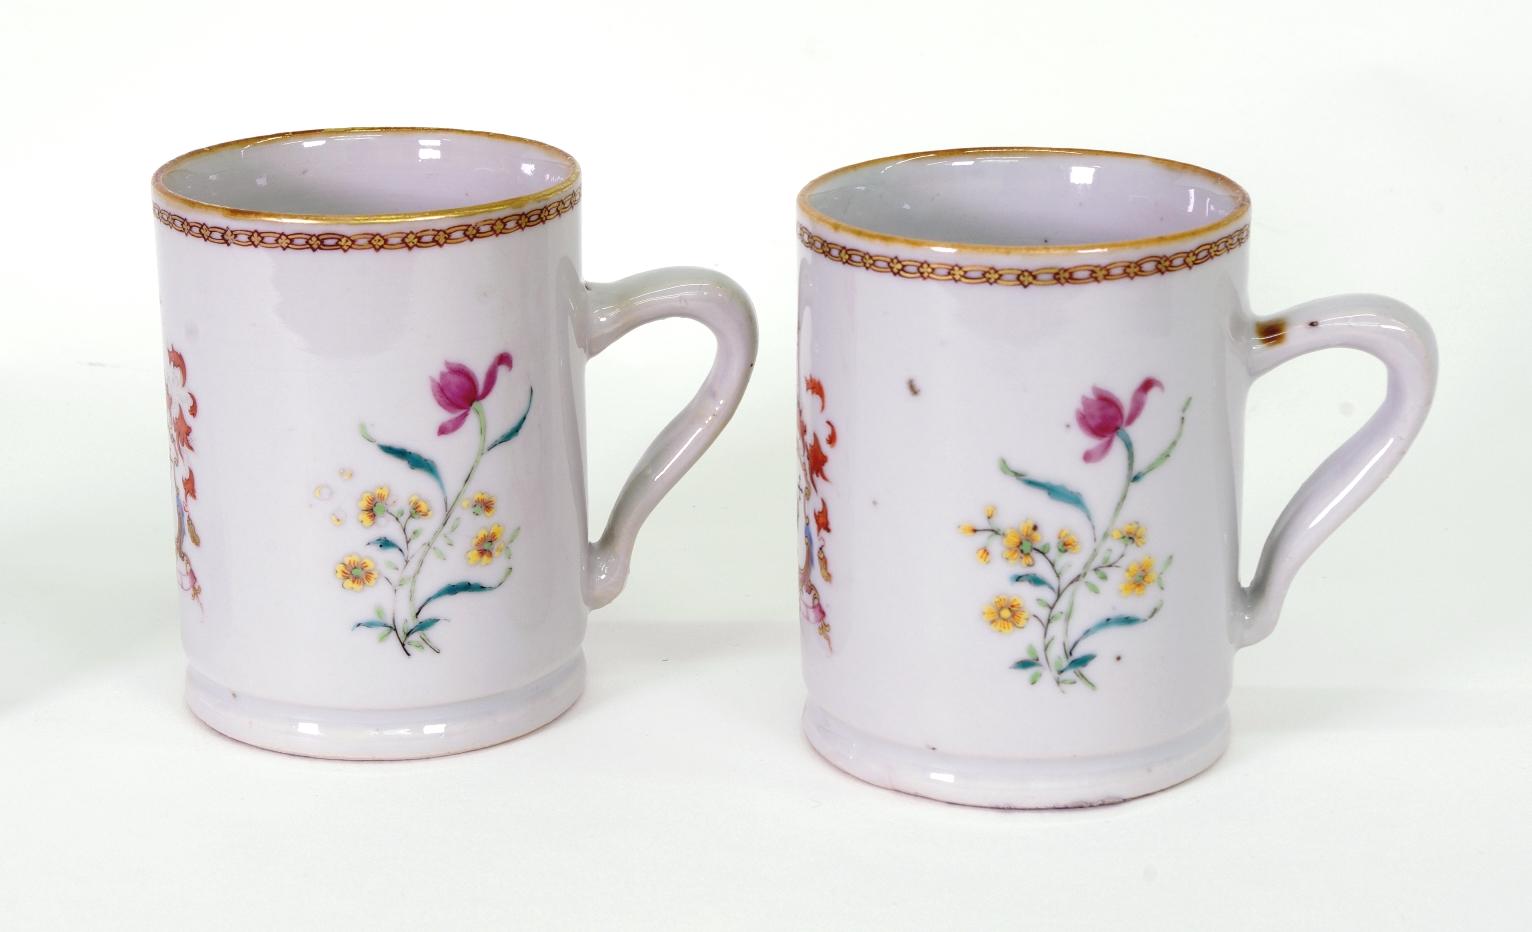 Pair of Chinese export porcelain armorial small mugs, each with the arms of Amyas and decorated with flower sprigs. 

See David S. Howard Chinese, Armorial Porcelain Vol I (London: Faber and Faber Limited, 1974), 532.